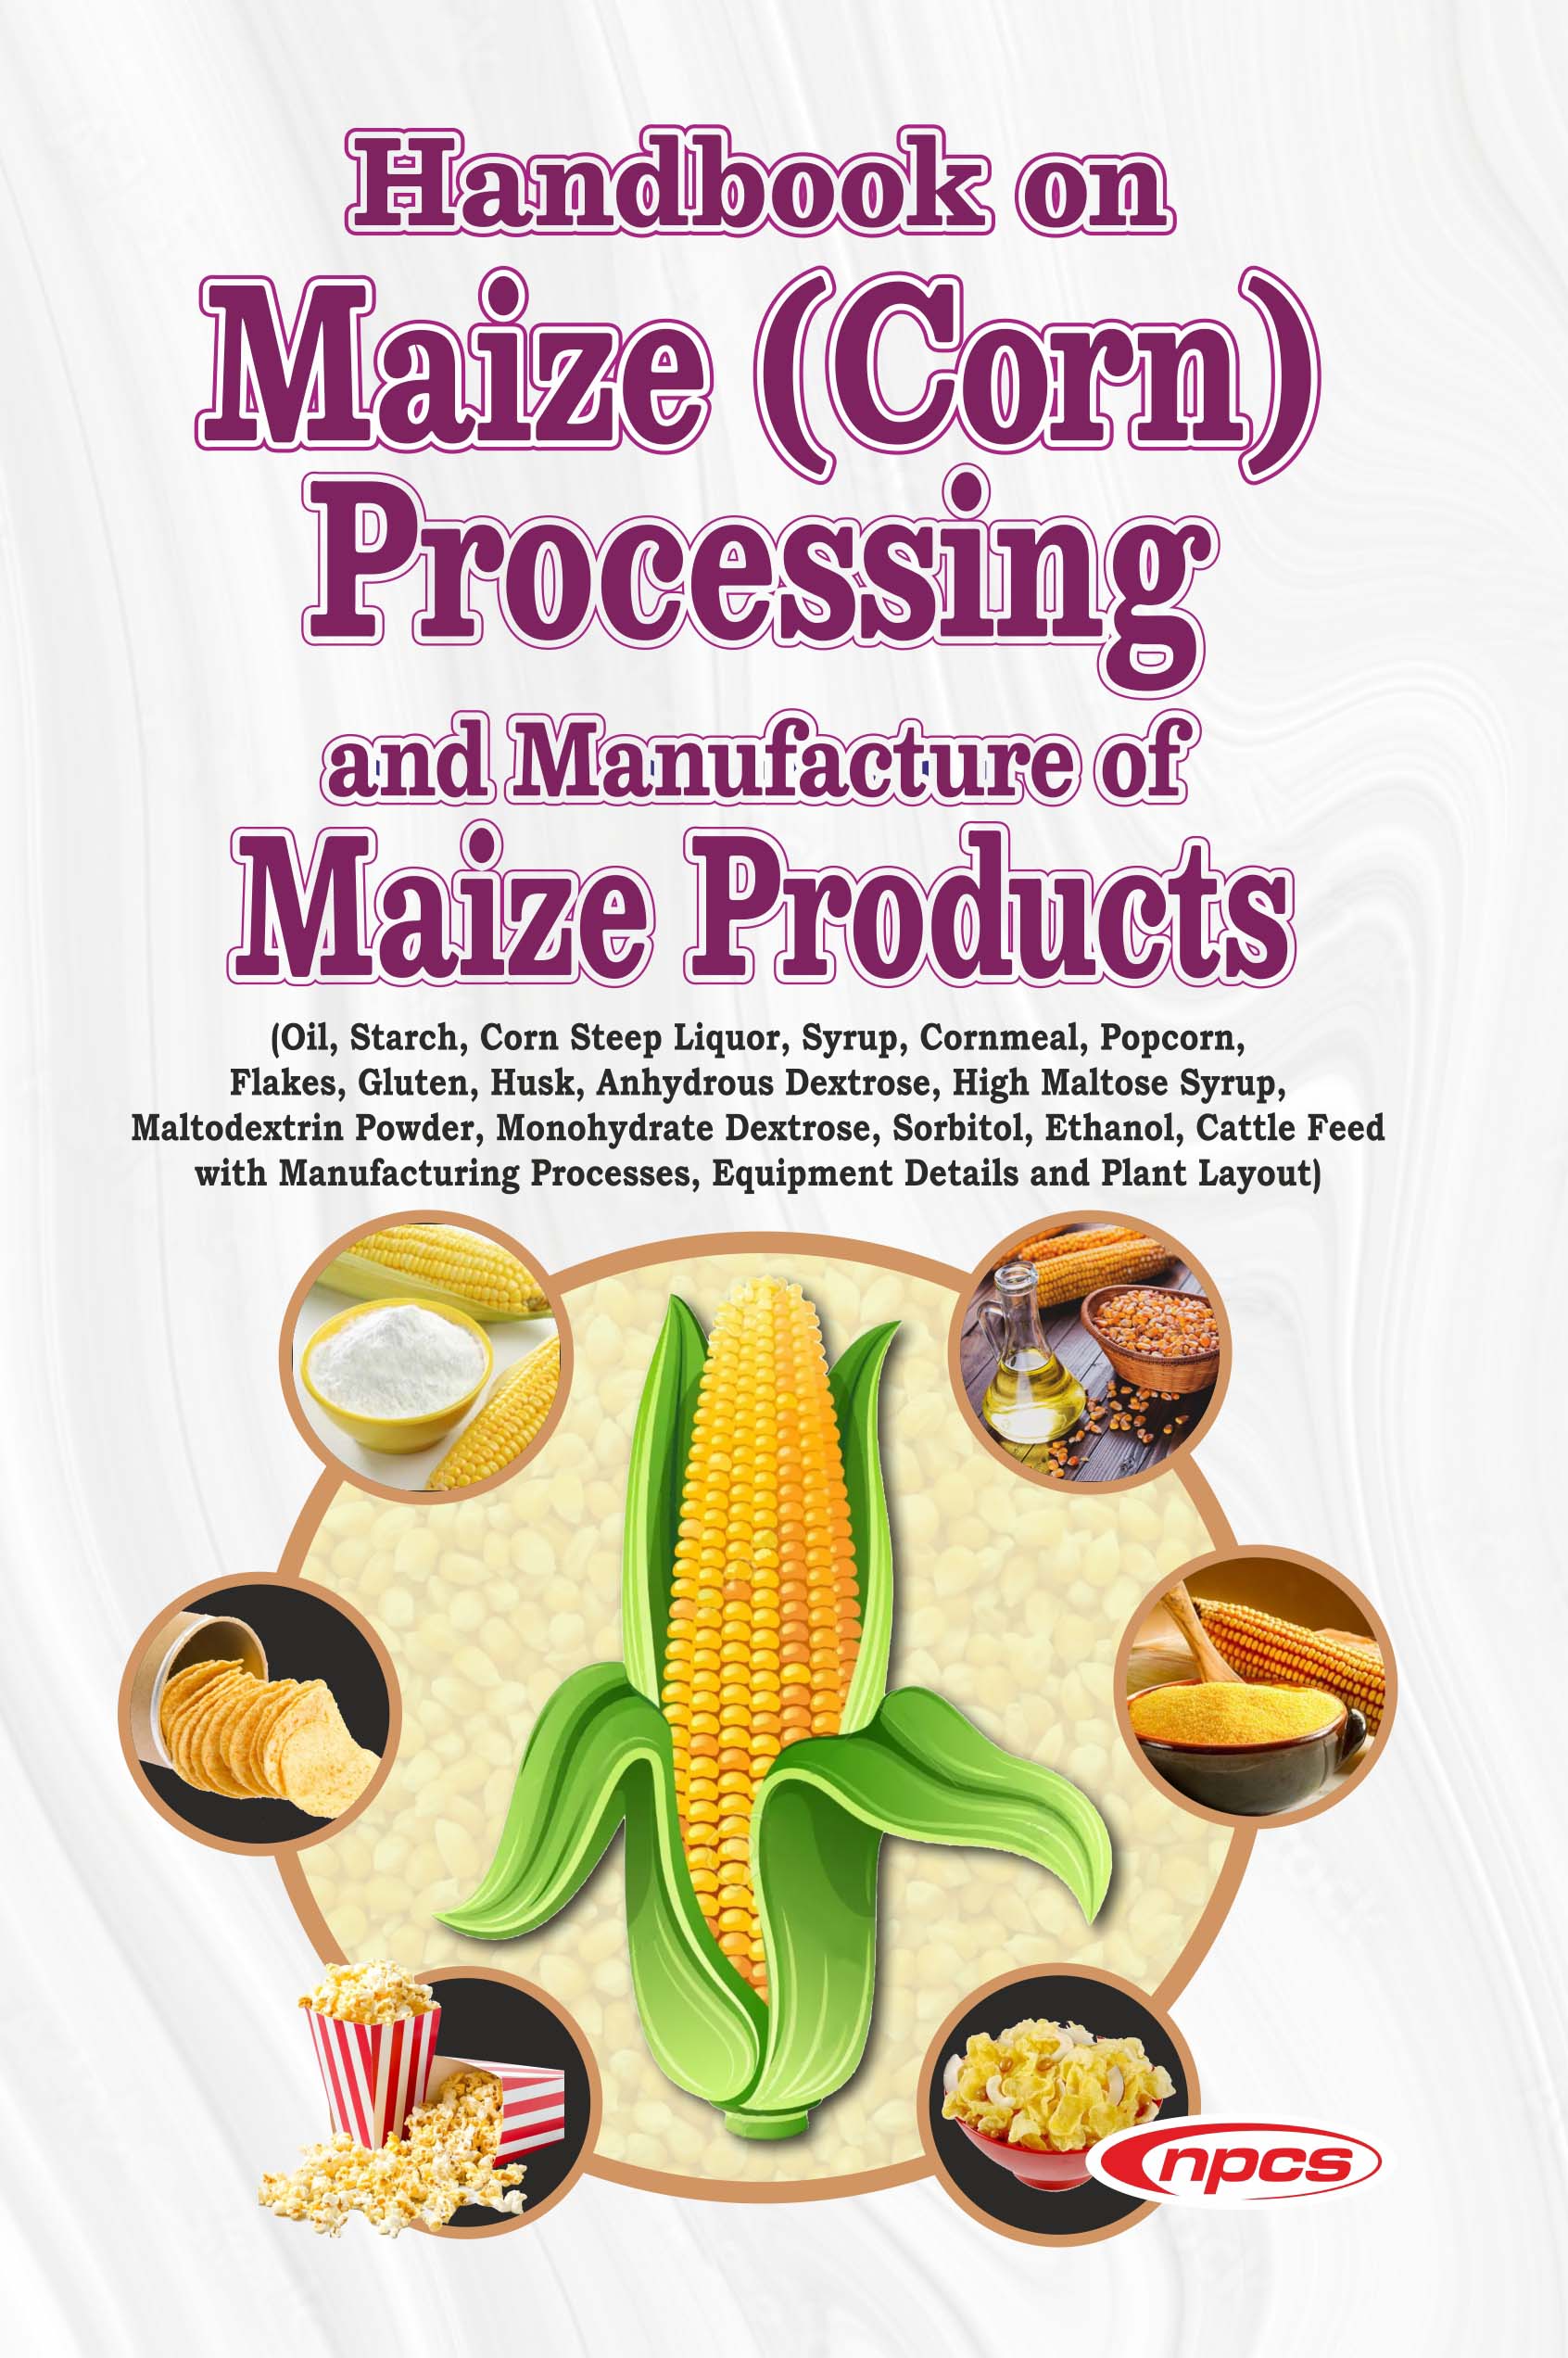 Handbook on Maize Corn Processing and Manufacture of Maize Products